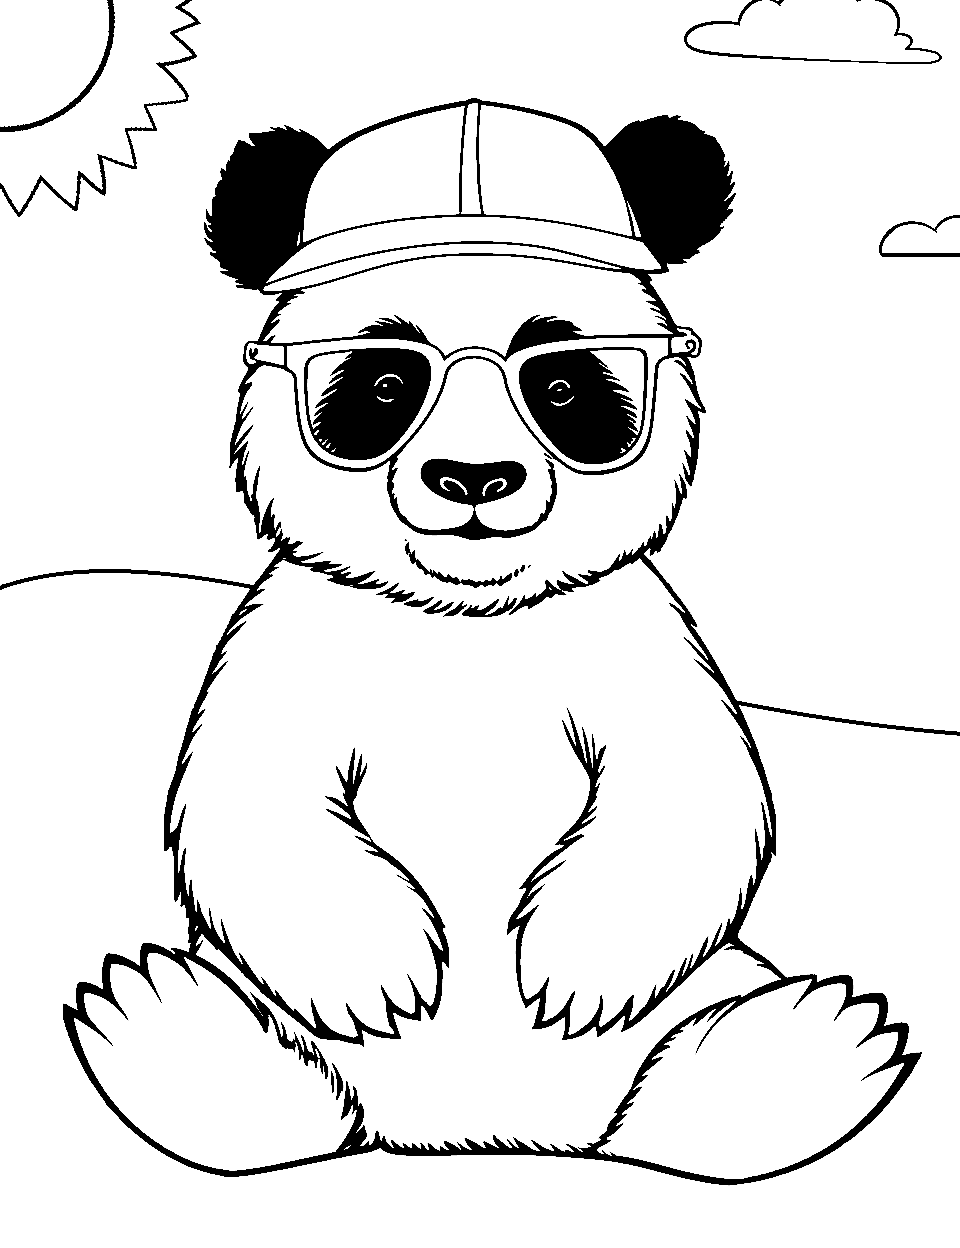 Cool Panda with Sunglasses Coloring Page - A cool panda chilling under the sun, wearing oversized sunglasses and a sun hat.